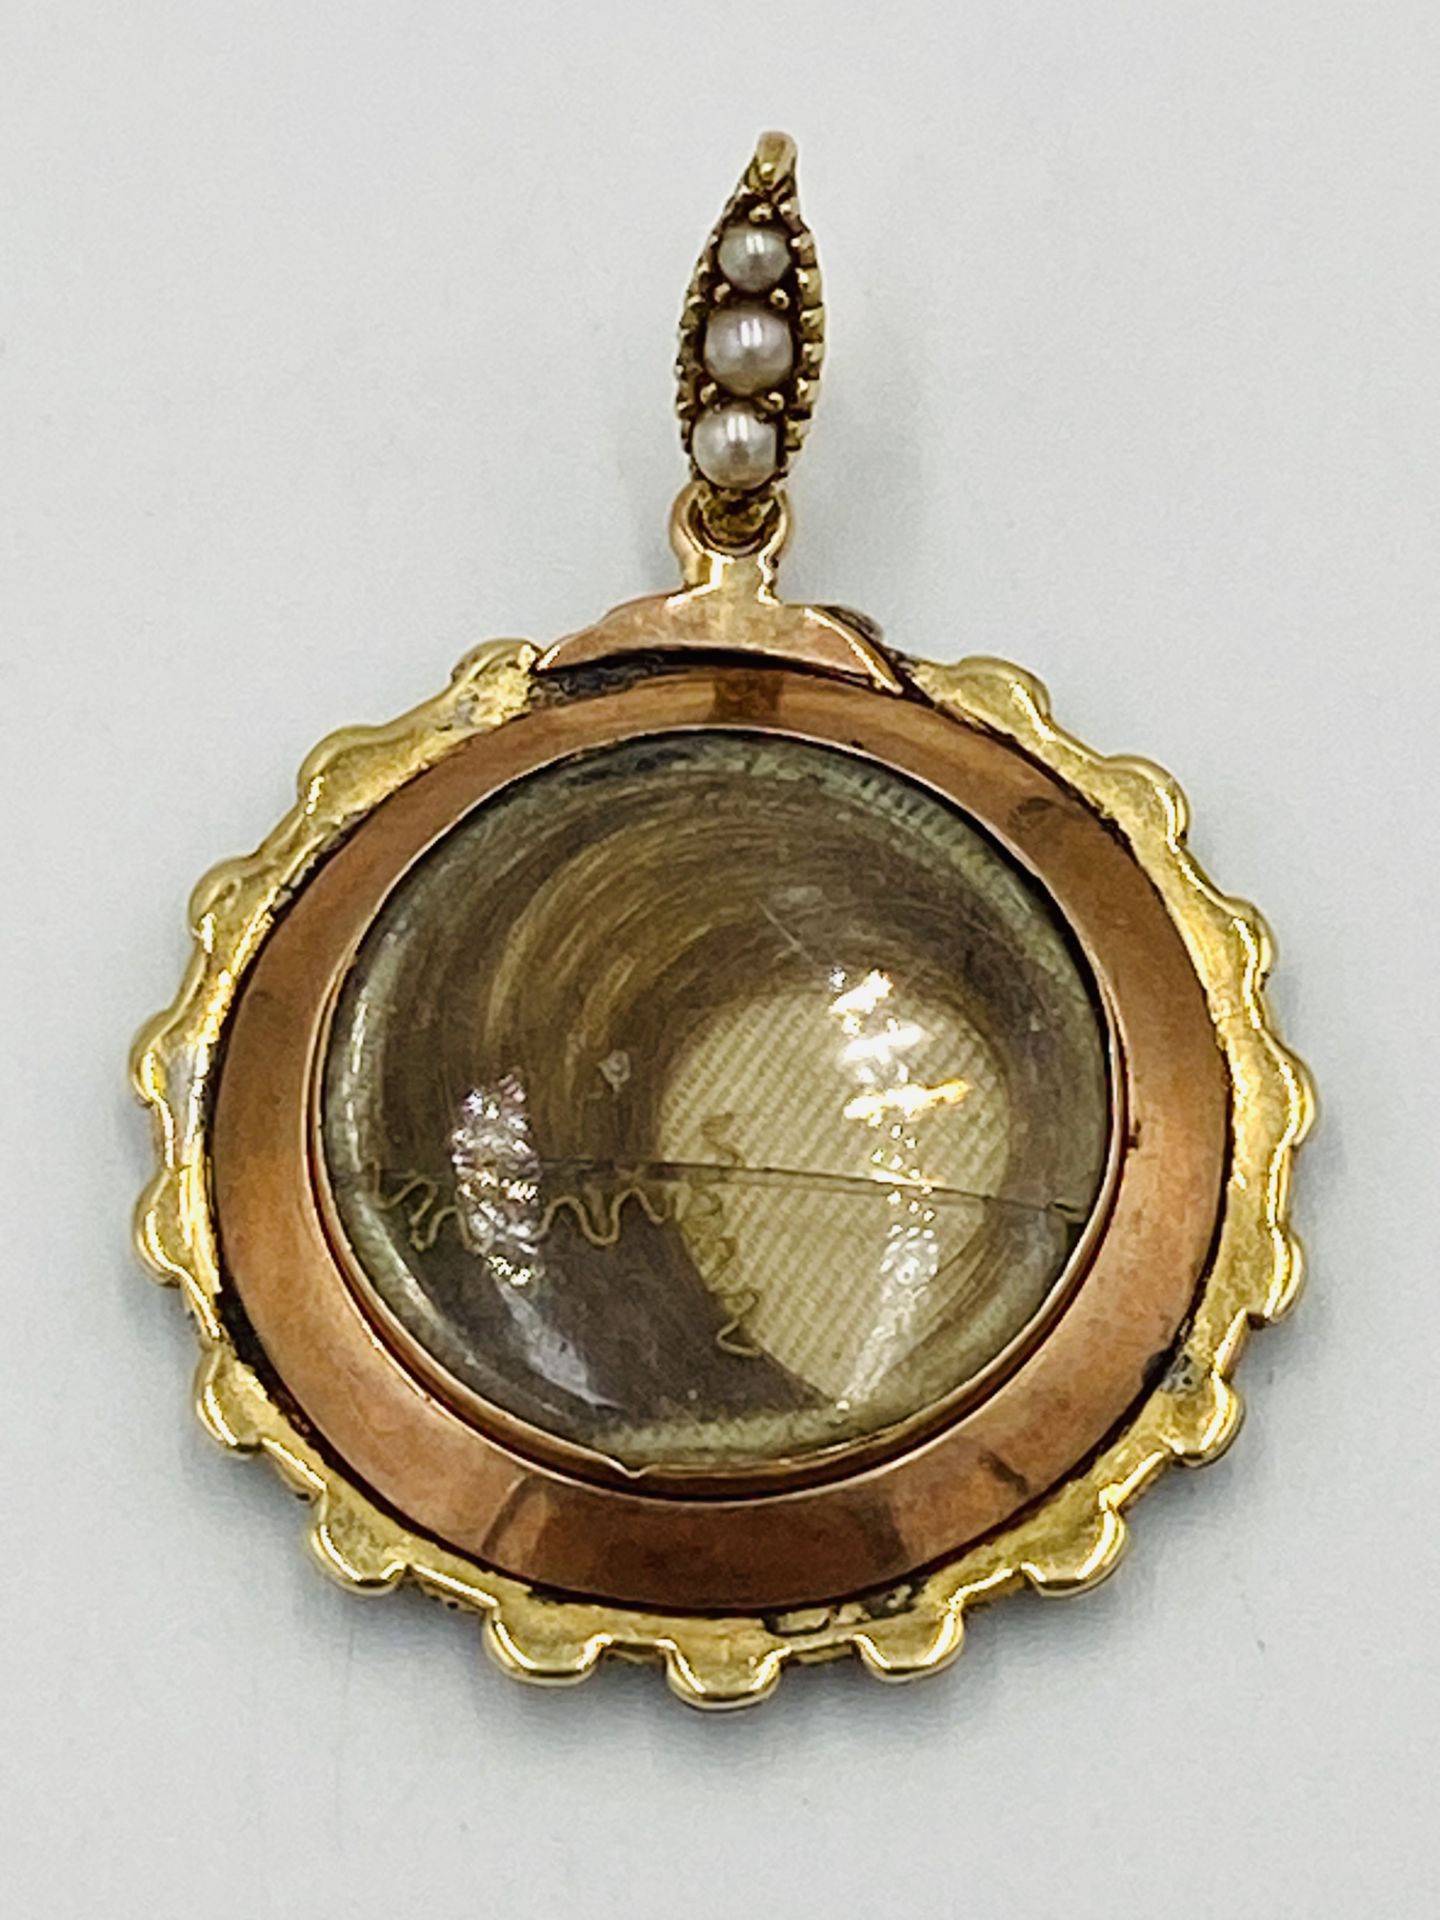 Portrait pendant with pearl and emerald surround - Image 4 of 4